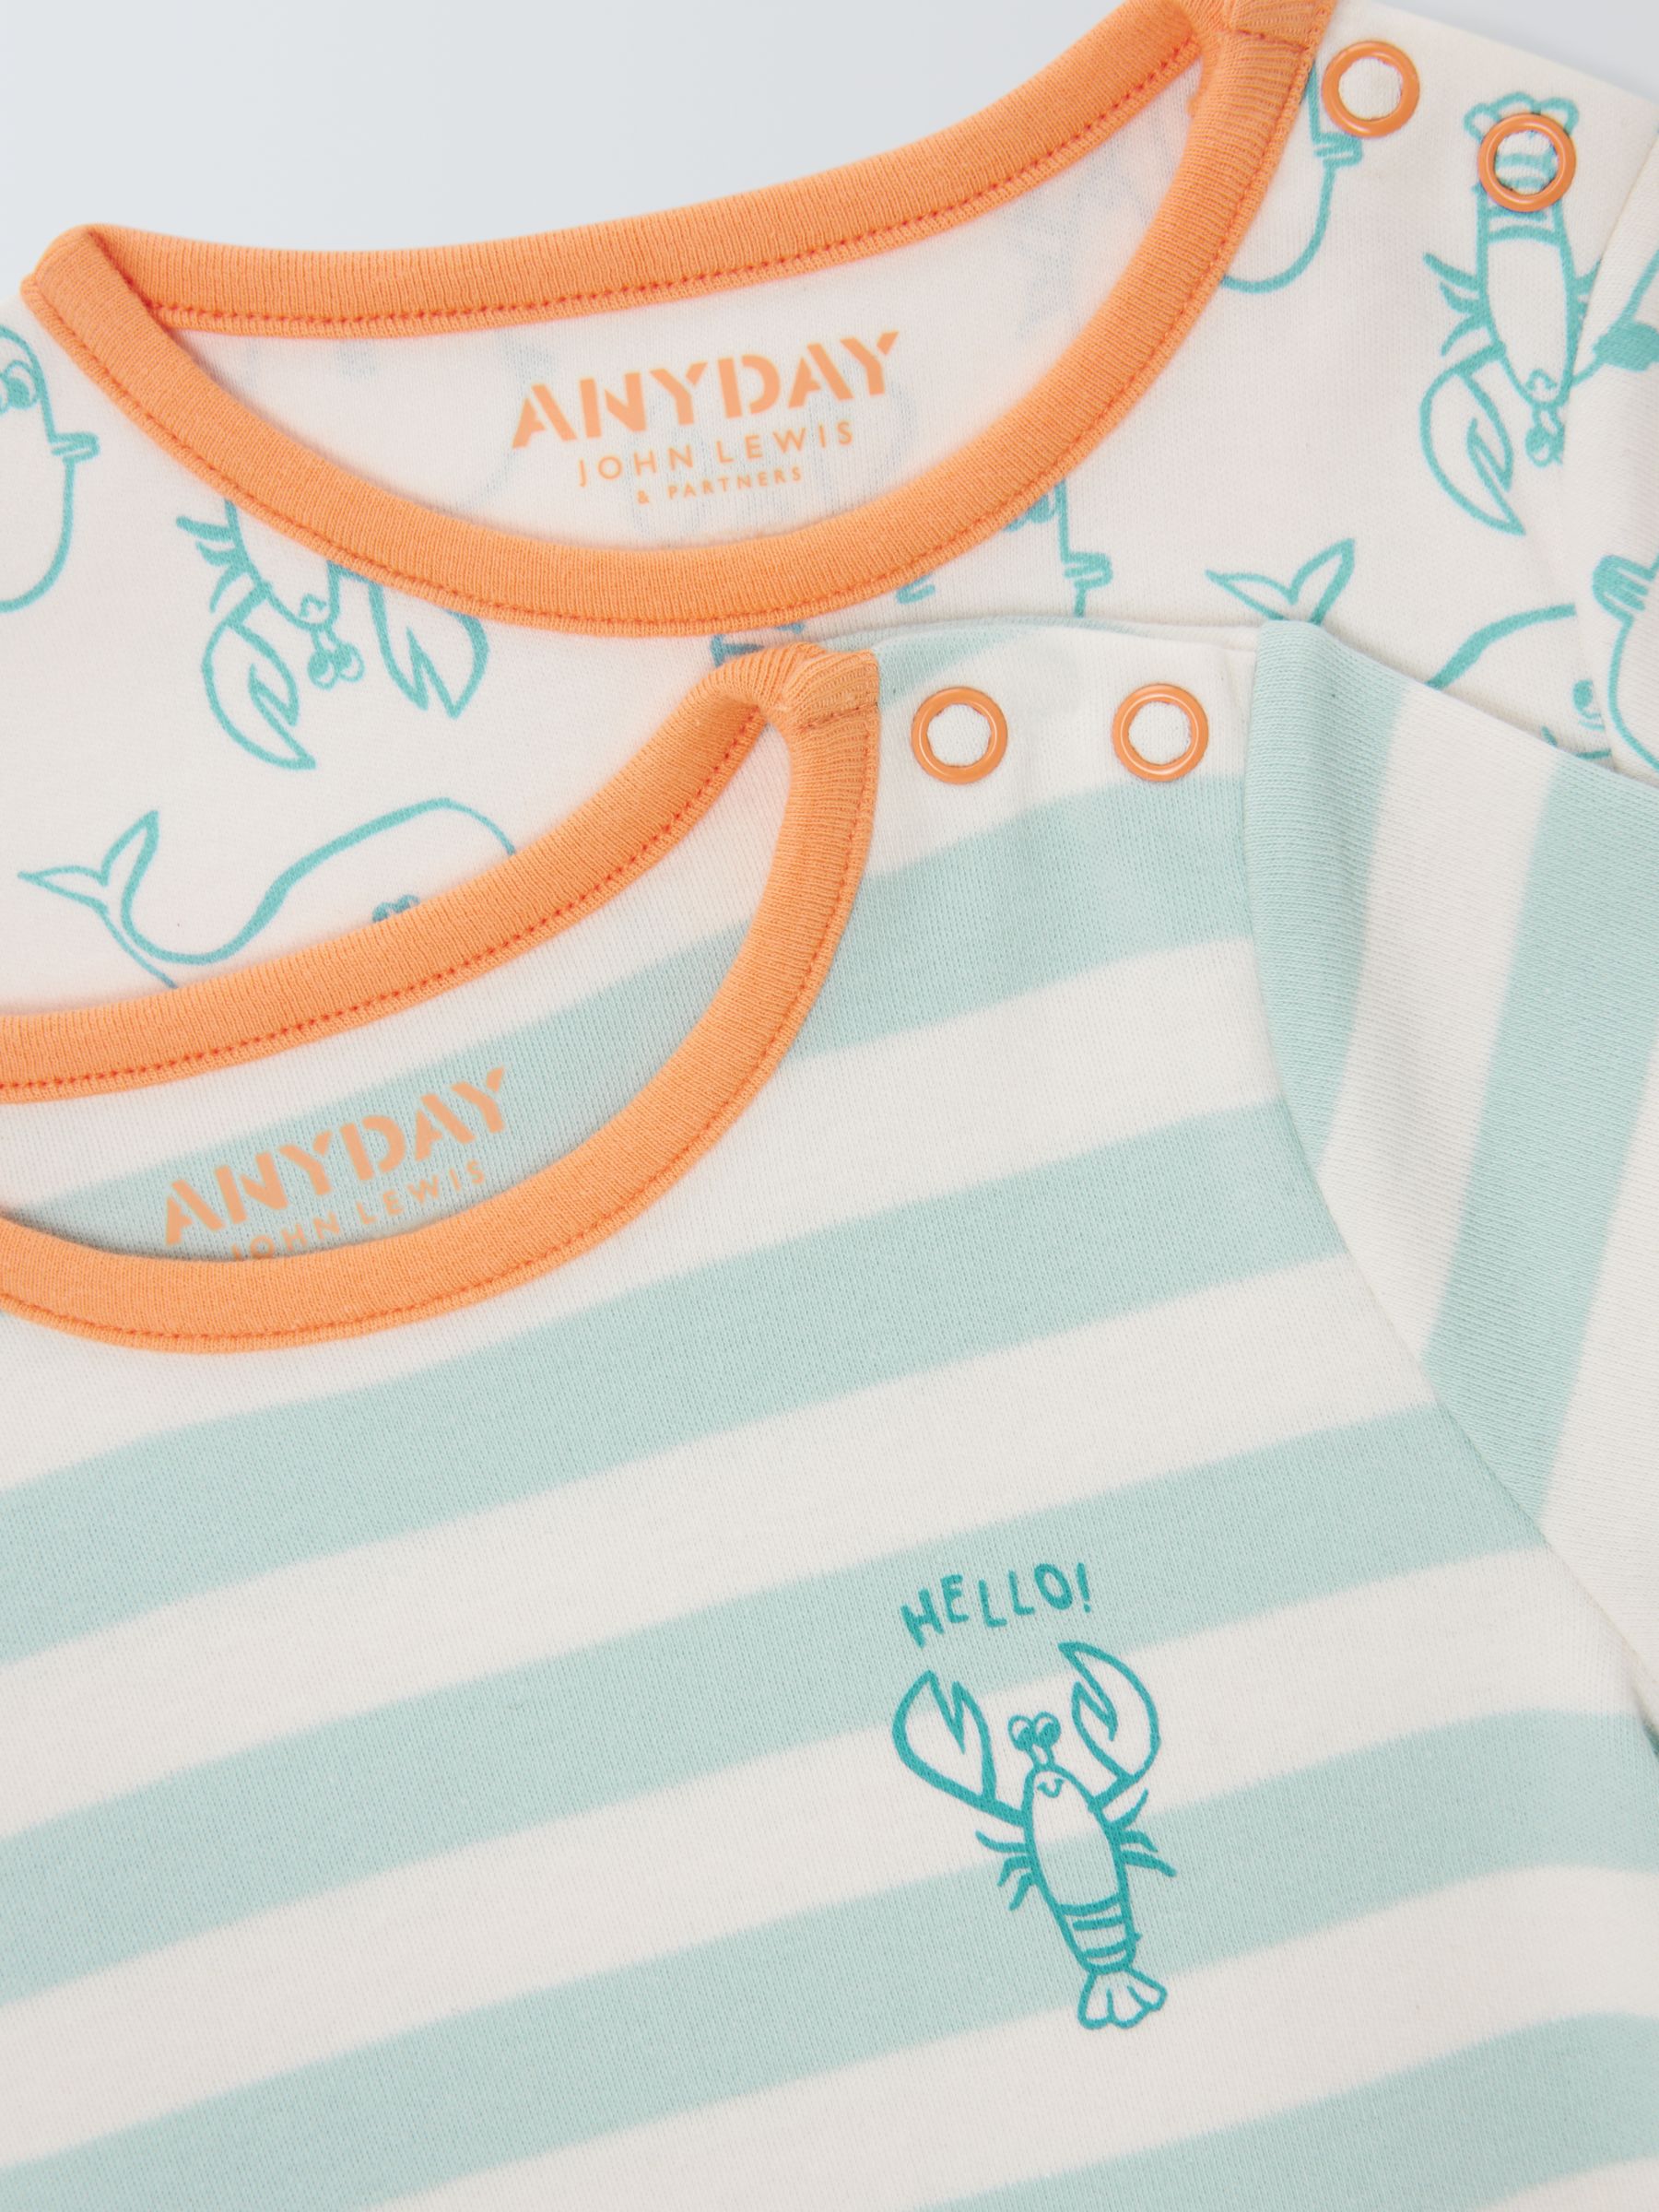 John Lewis ANYDAY Baby Stripe Lobster Romper, Pack of 2, Blue, 9-12 months